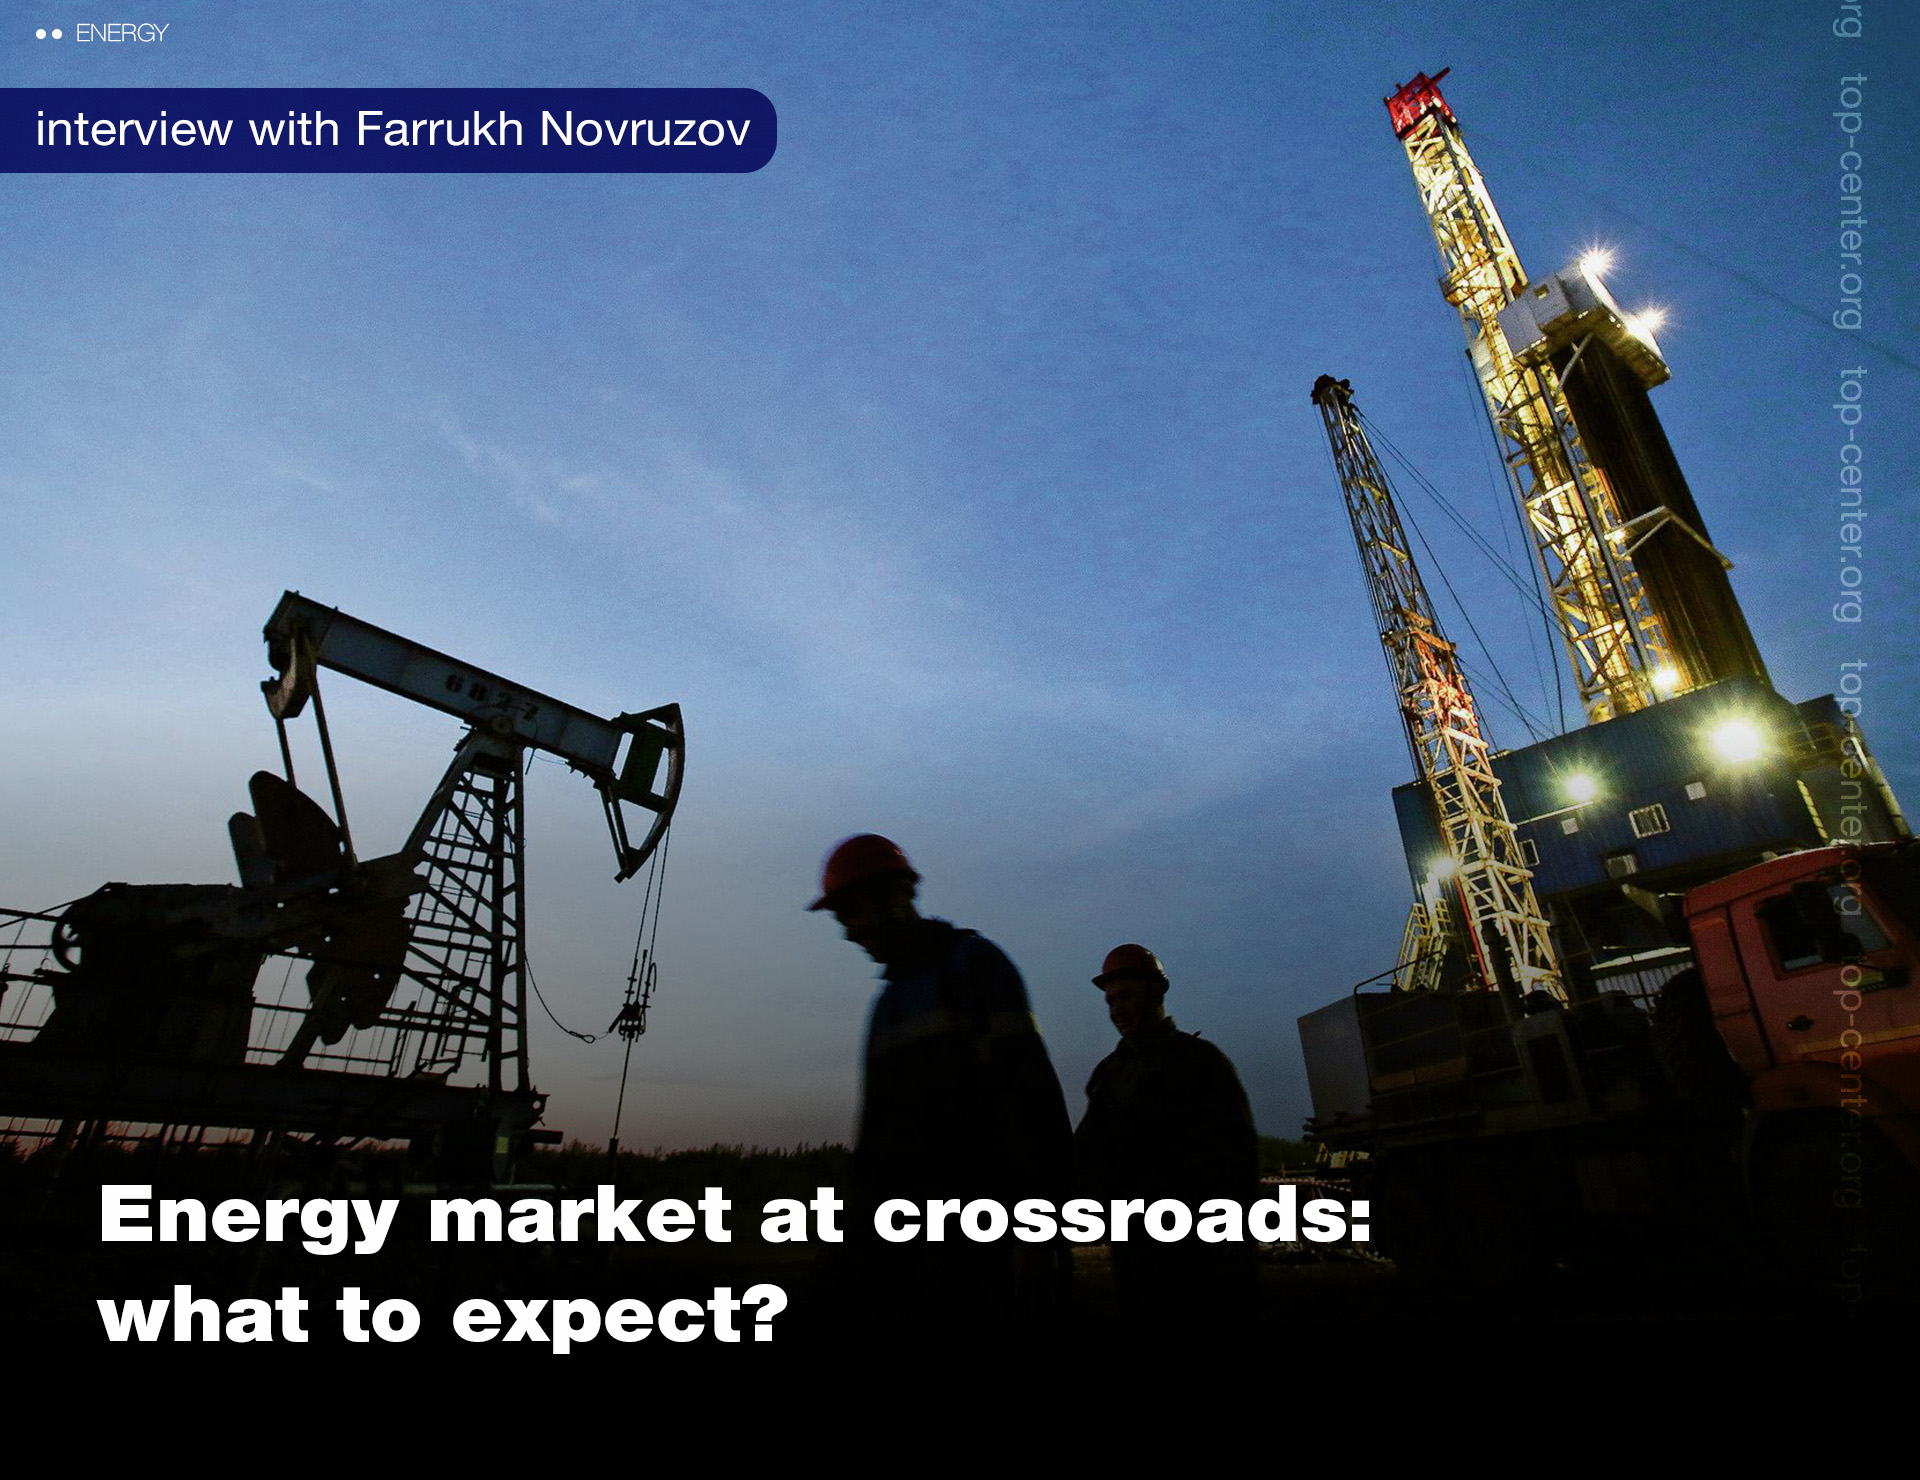 Energy market at crossroads: what to expect?